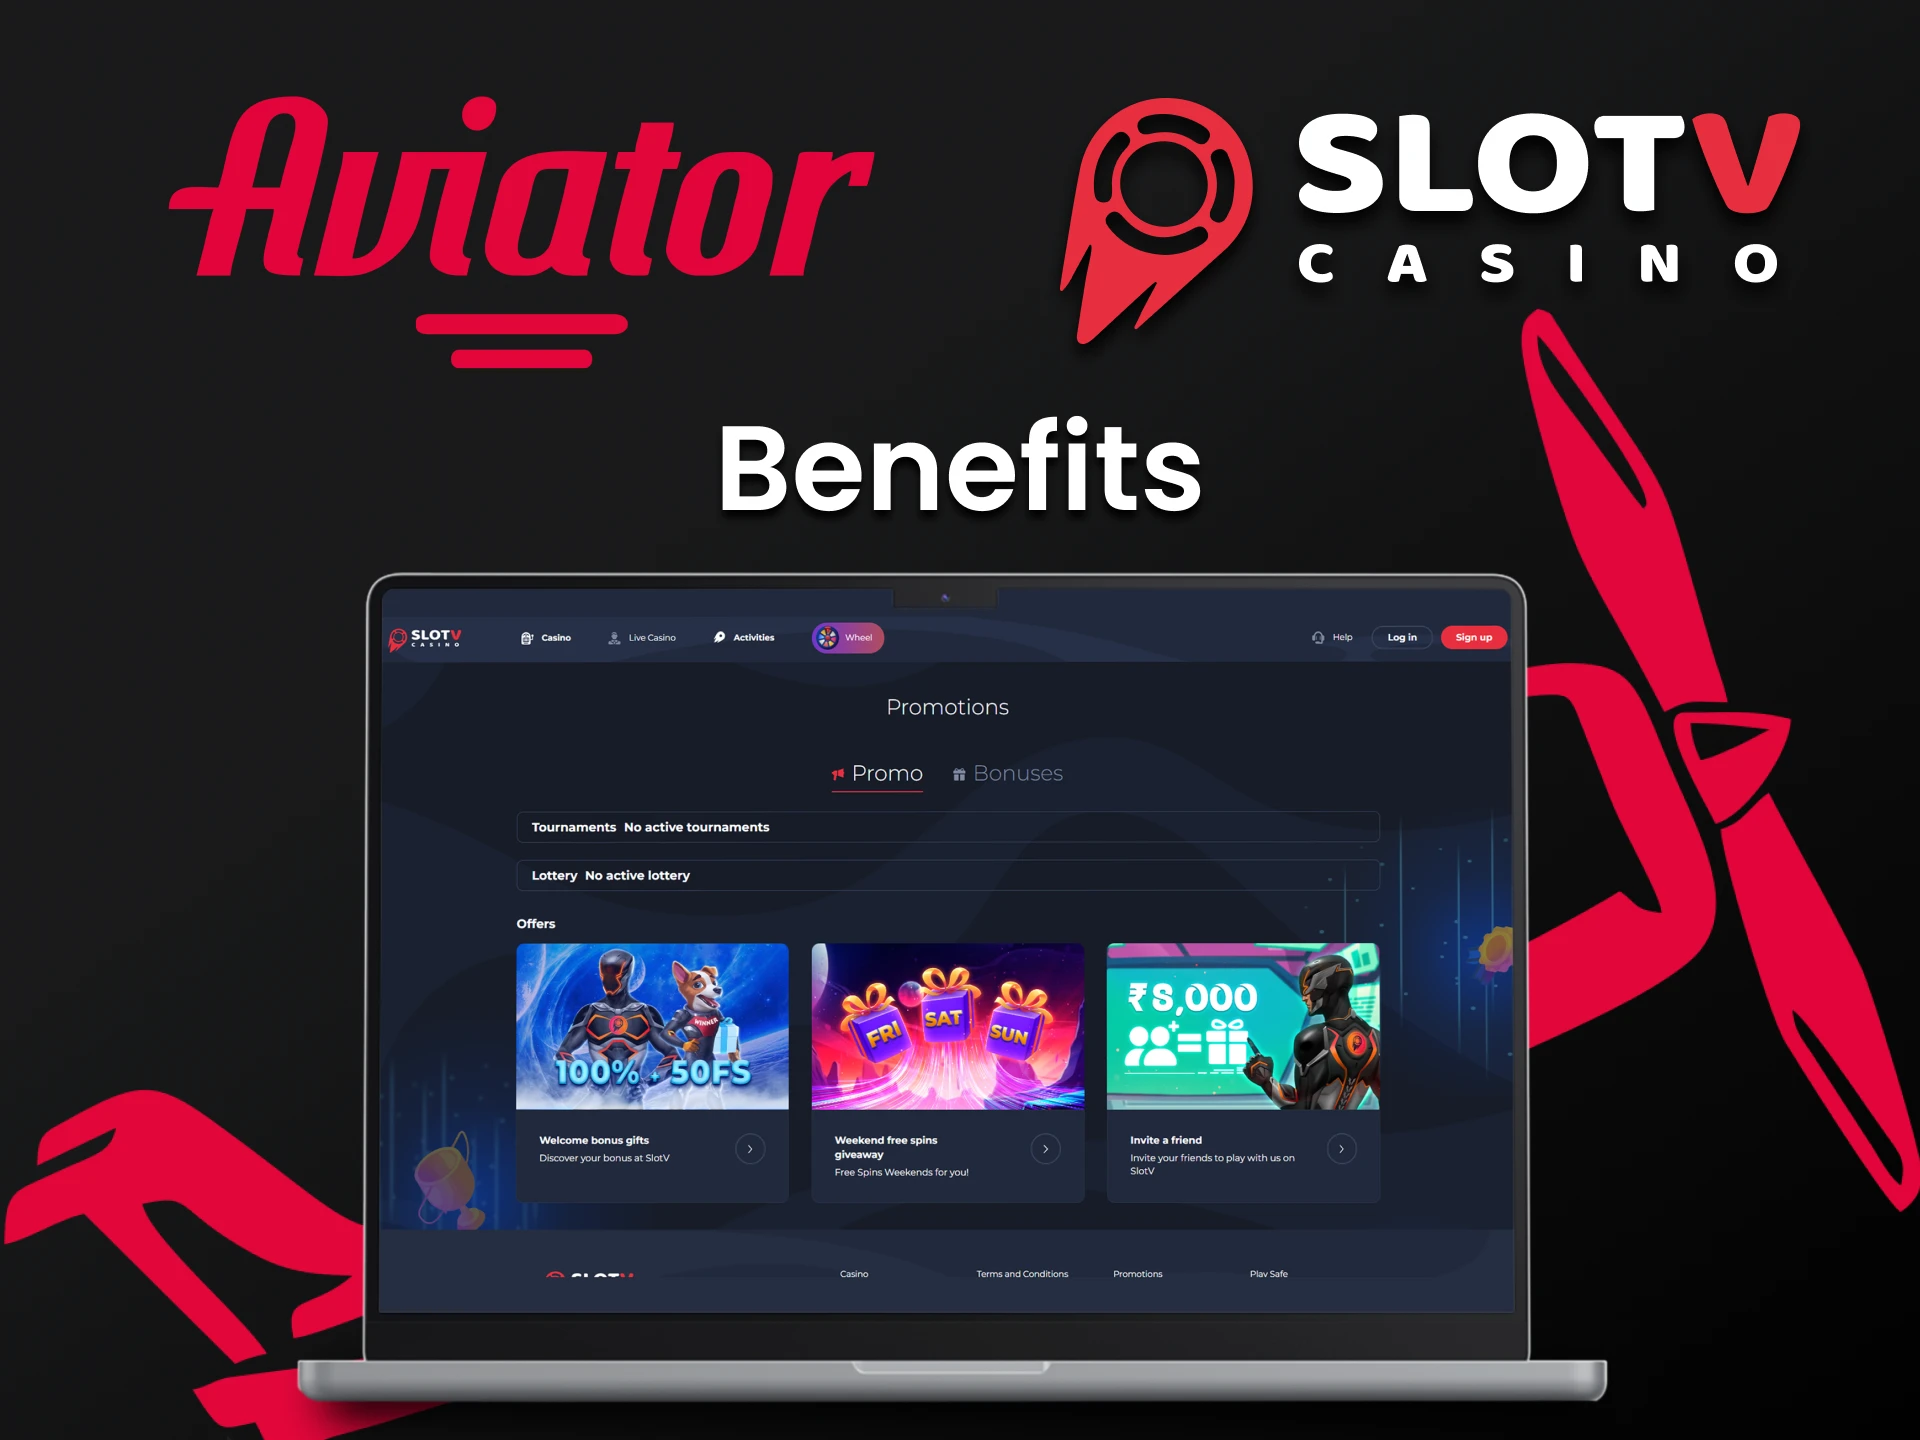 SlotV has many benefits for its users.